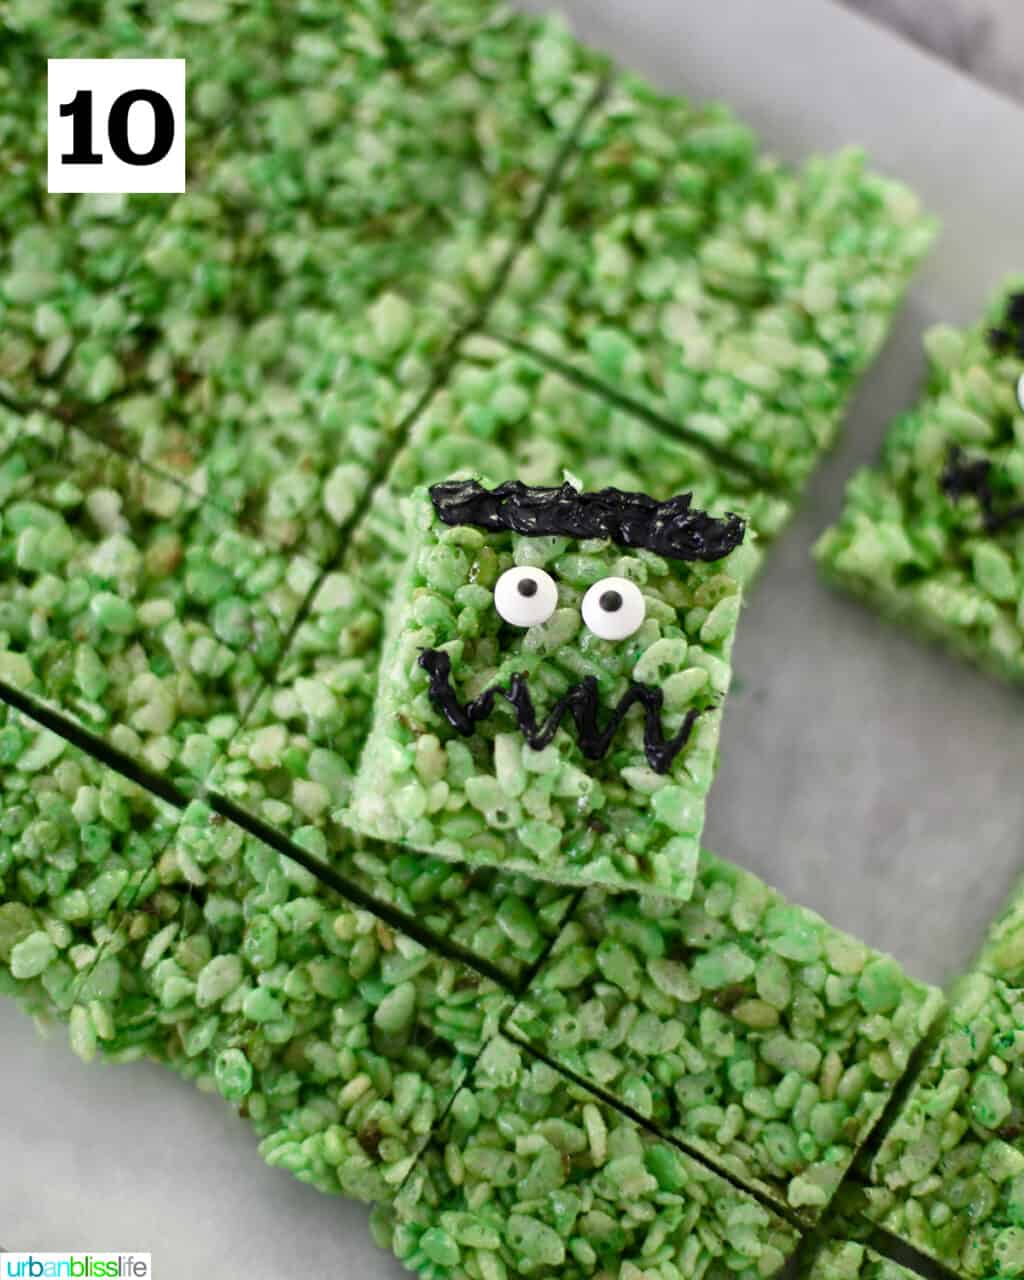 one decorated Frankenstein Rice Krispie on top of the batch of treats